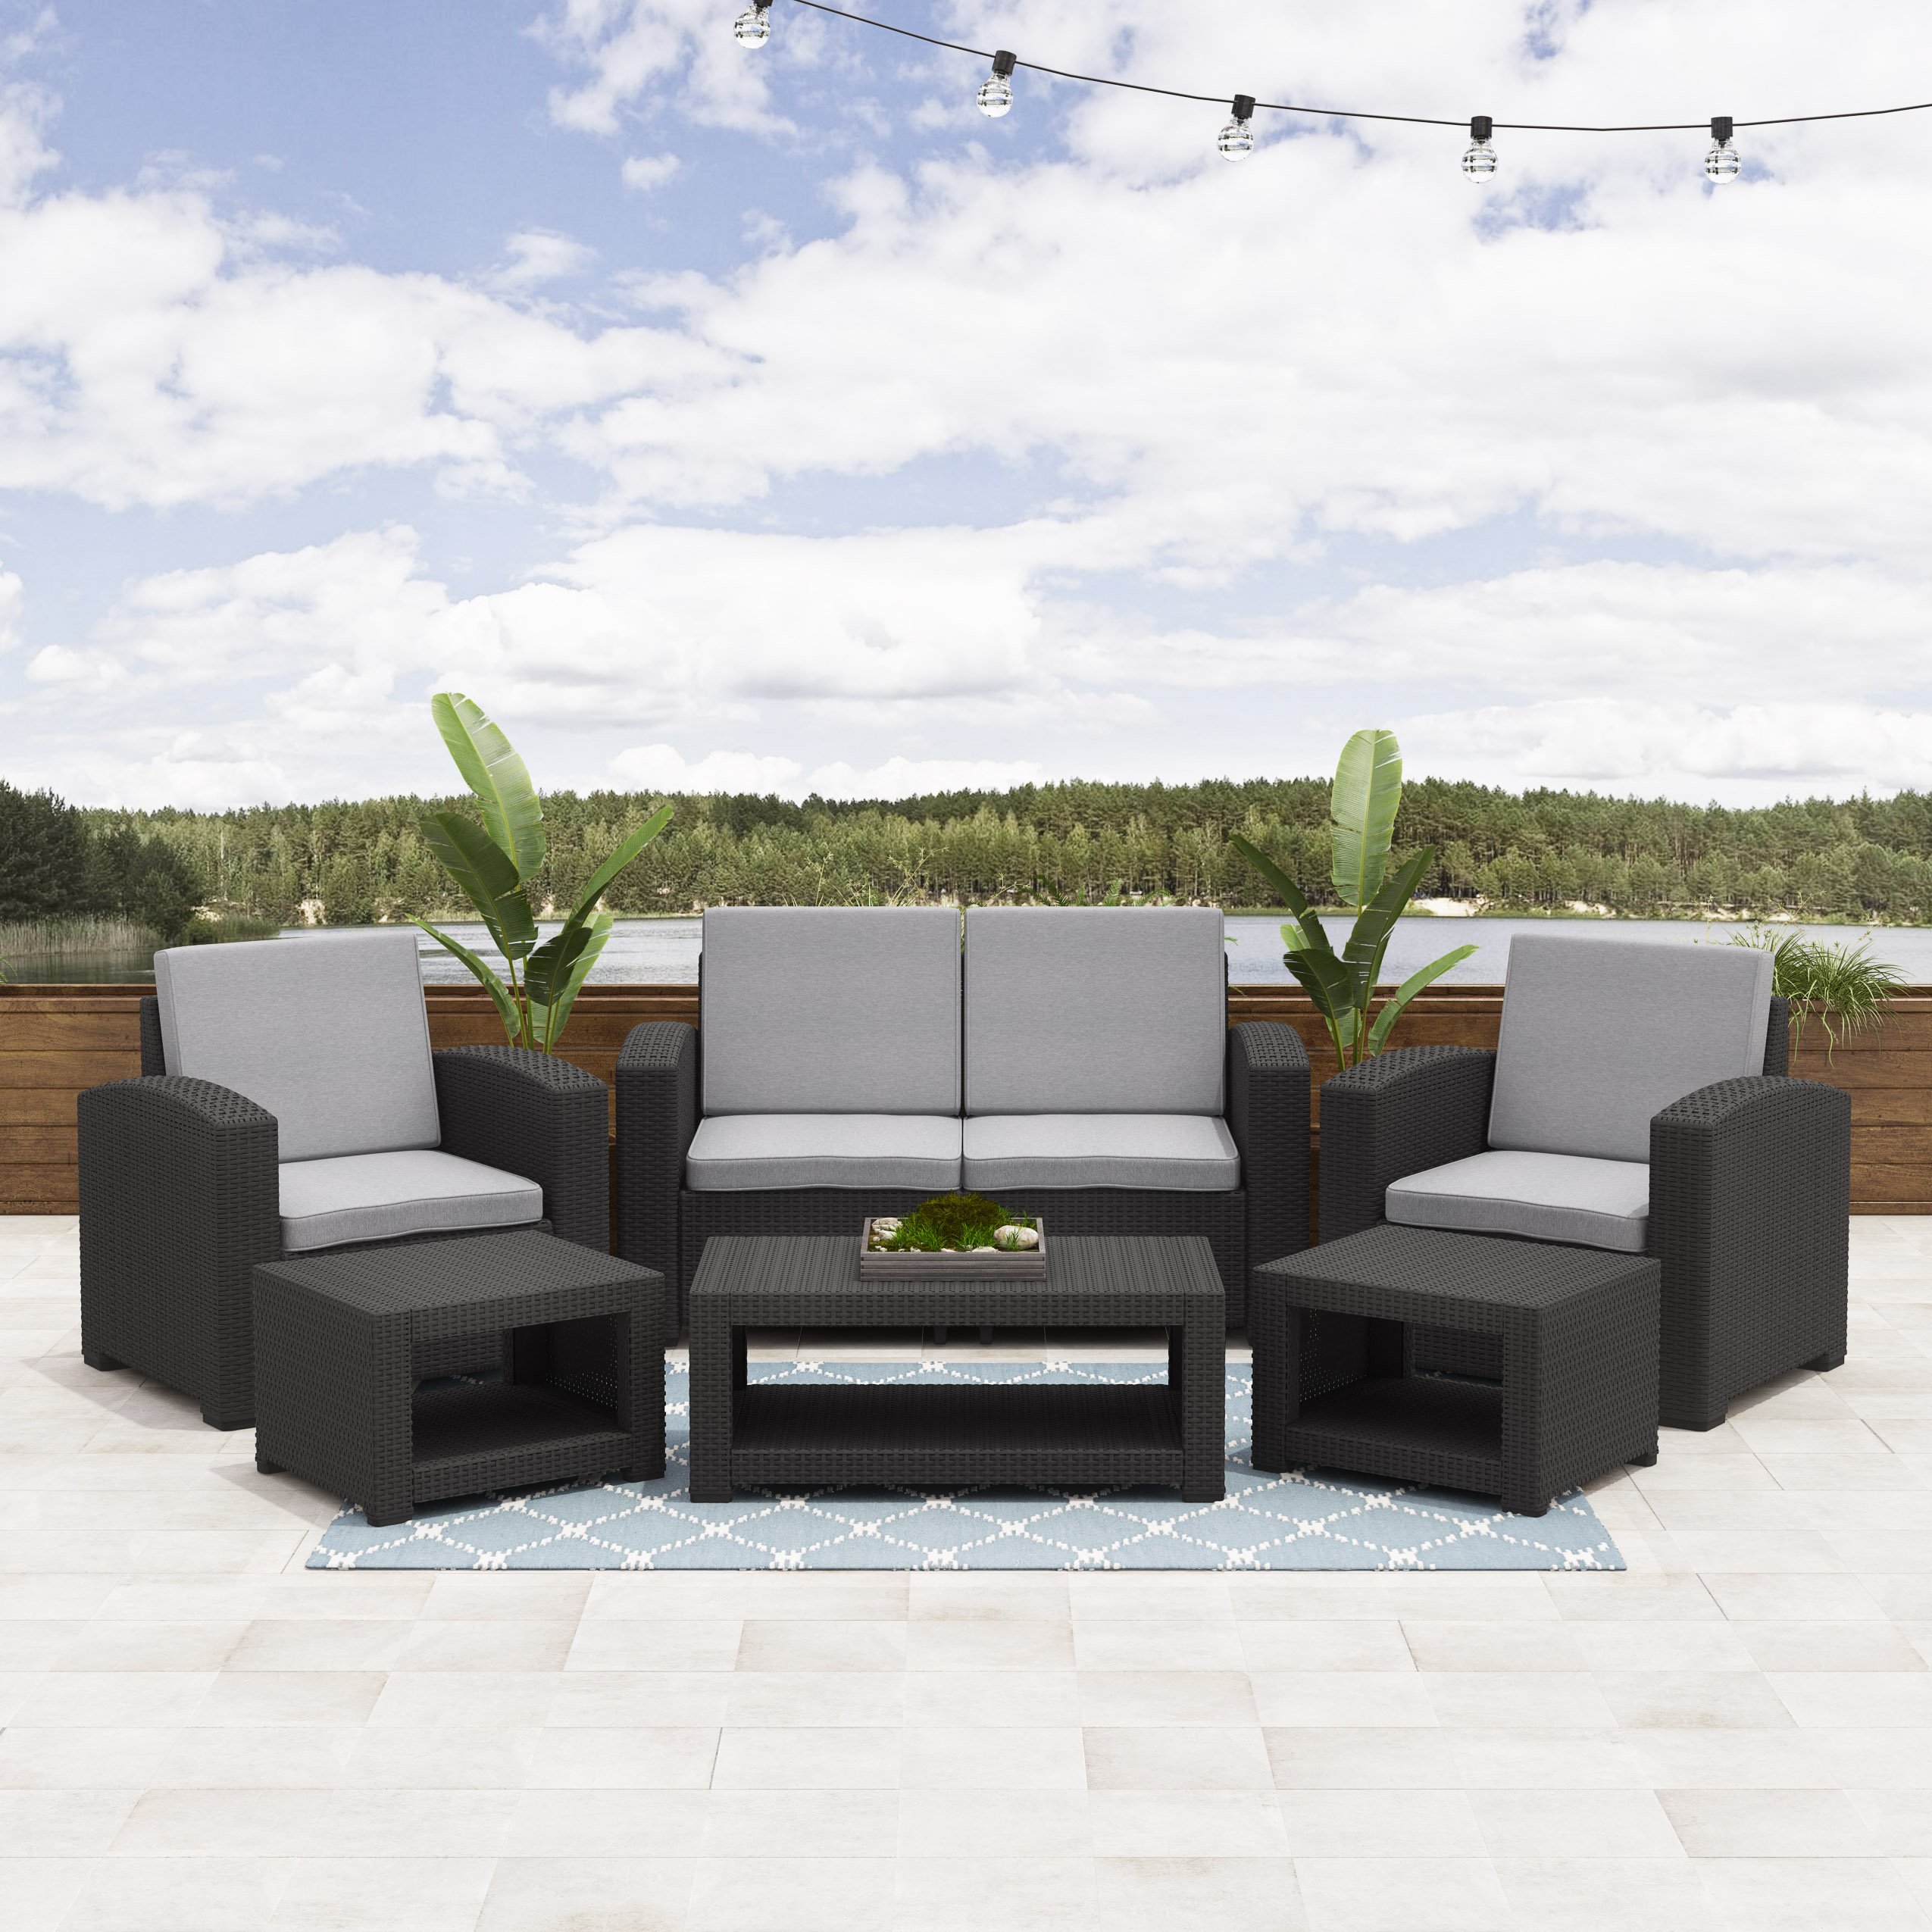 CorLiving All-Weather 6pc Patio Conversation Set - image 3 of 11